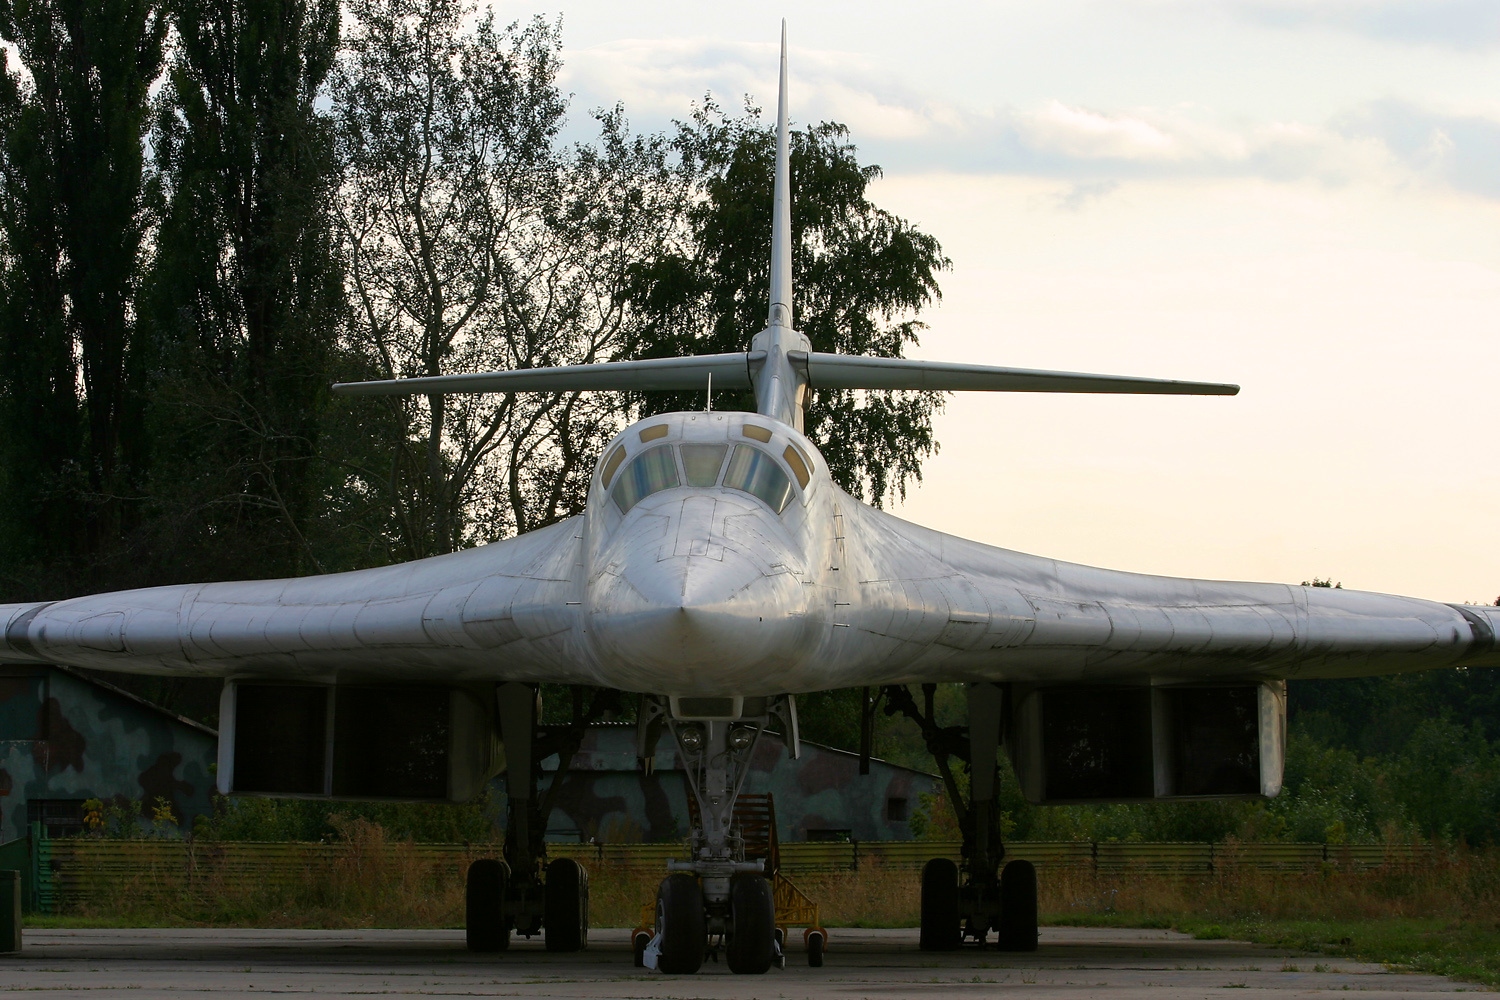 The blended wing design was an important concept for the Tu-160.